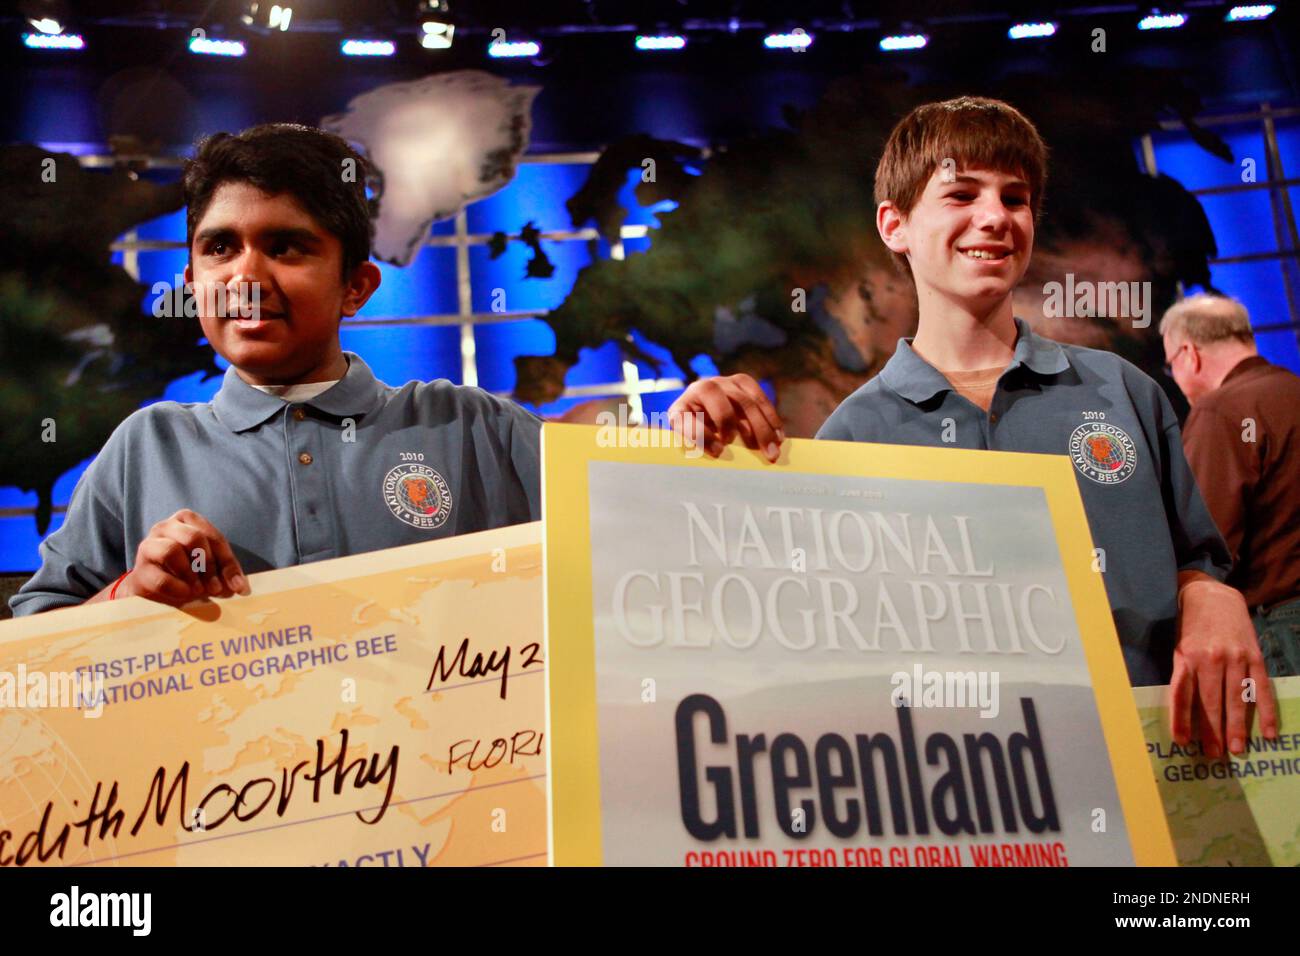 https://c8.alamy.com/comp/2NDNERH/first-place-winner-aadith-moorthy-of-palm-harbor-fla-left-and-second-place-winner-oliver-lucier-13-of-wakefield-rhode-island-hold-their-winnings-at-the-end-of-the-national-geographic-bee-in-washington-on-wednesday-may-26-2010-moorthy-wins-a-25000-scholarship-and-a-trip-to-the-galapagos-islands-lucier-wins-a-15000-scholarship-ap-photojacquelyn-martin-2NDNERH.jpg